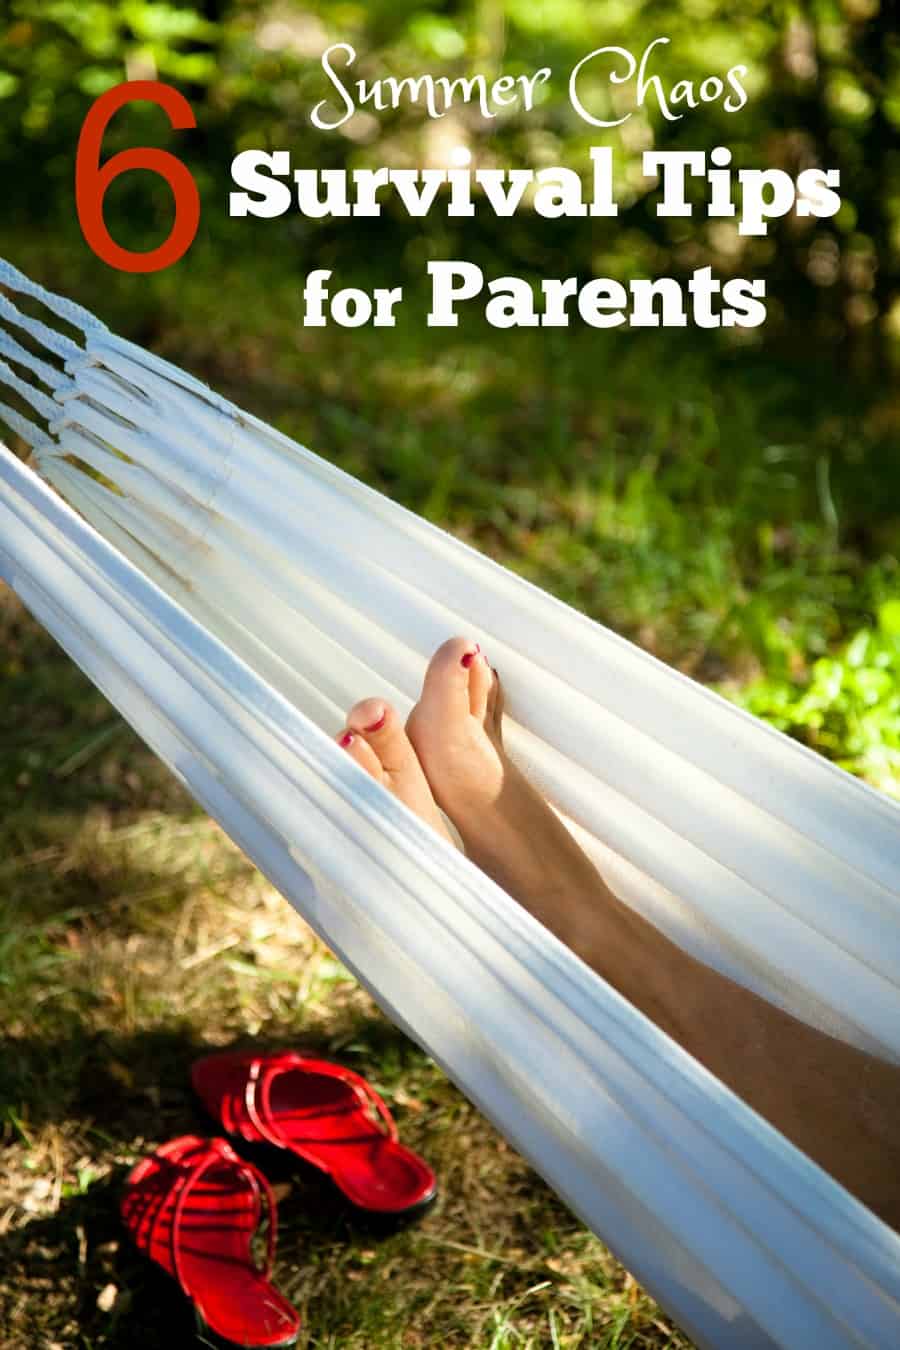 6 Summer Chaos Survival Tips for Parents